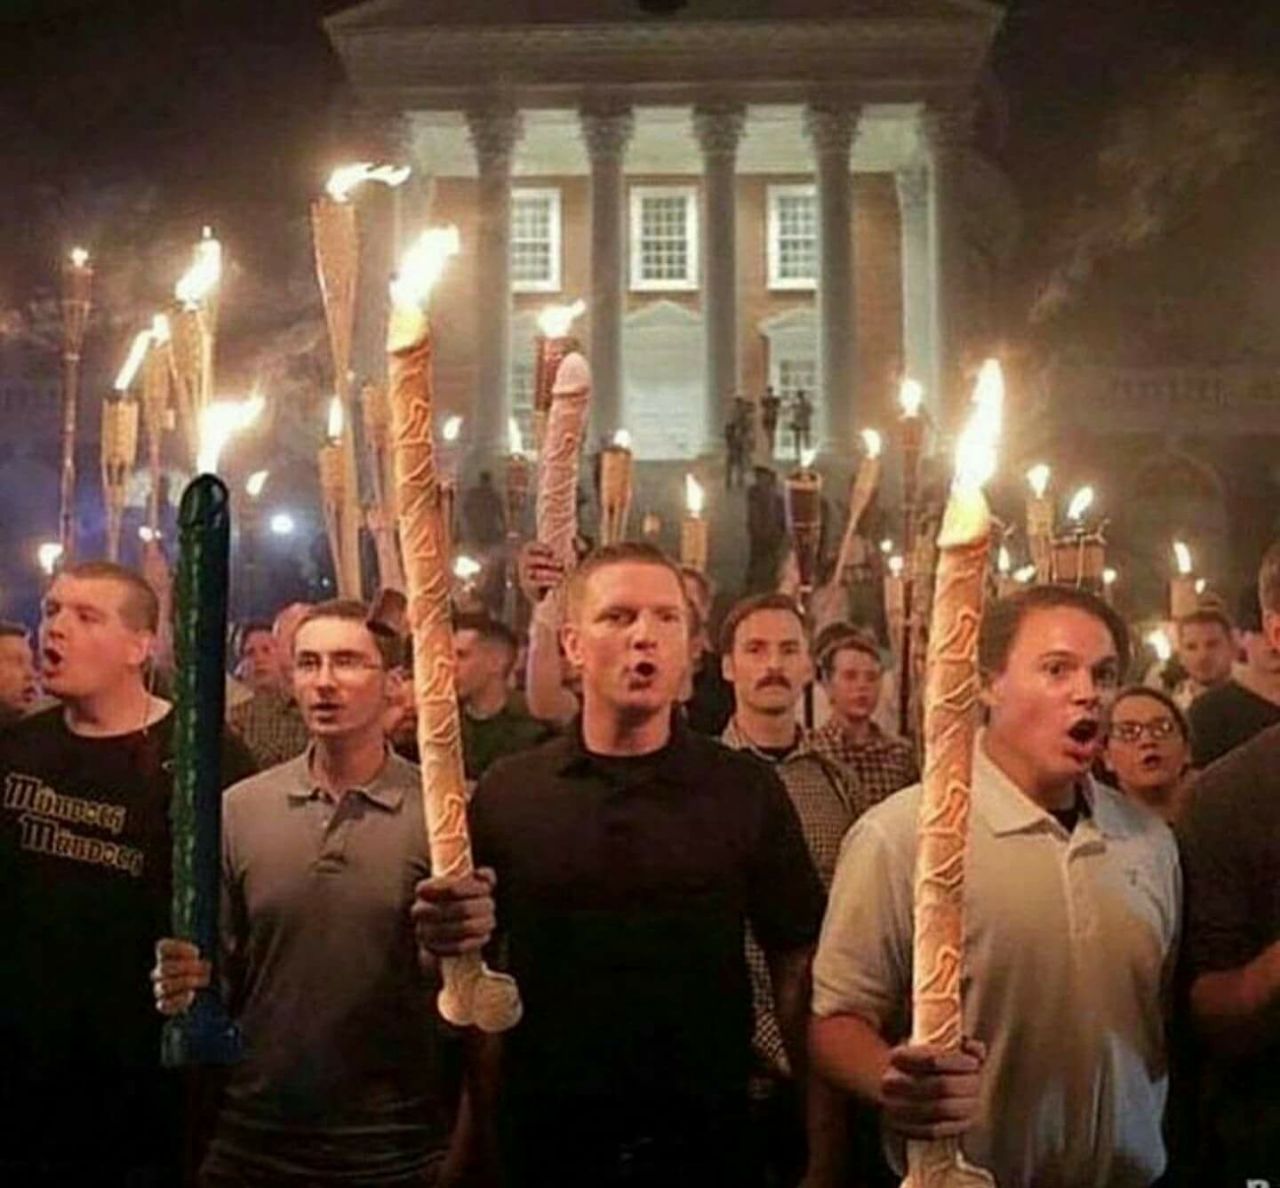 Nazis, alt-right, 3%'ers and white supremacists carry torches as they march through the University of Virginia campus in Charlottesville.